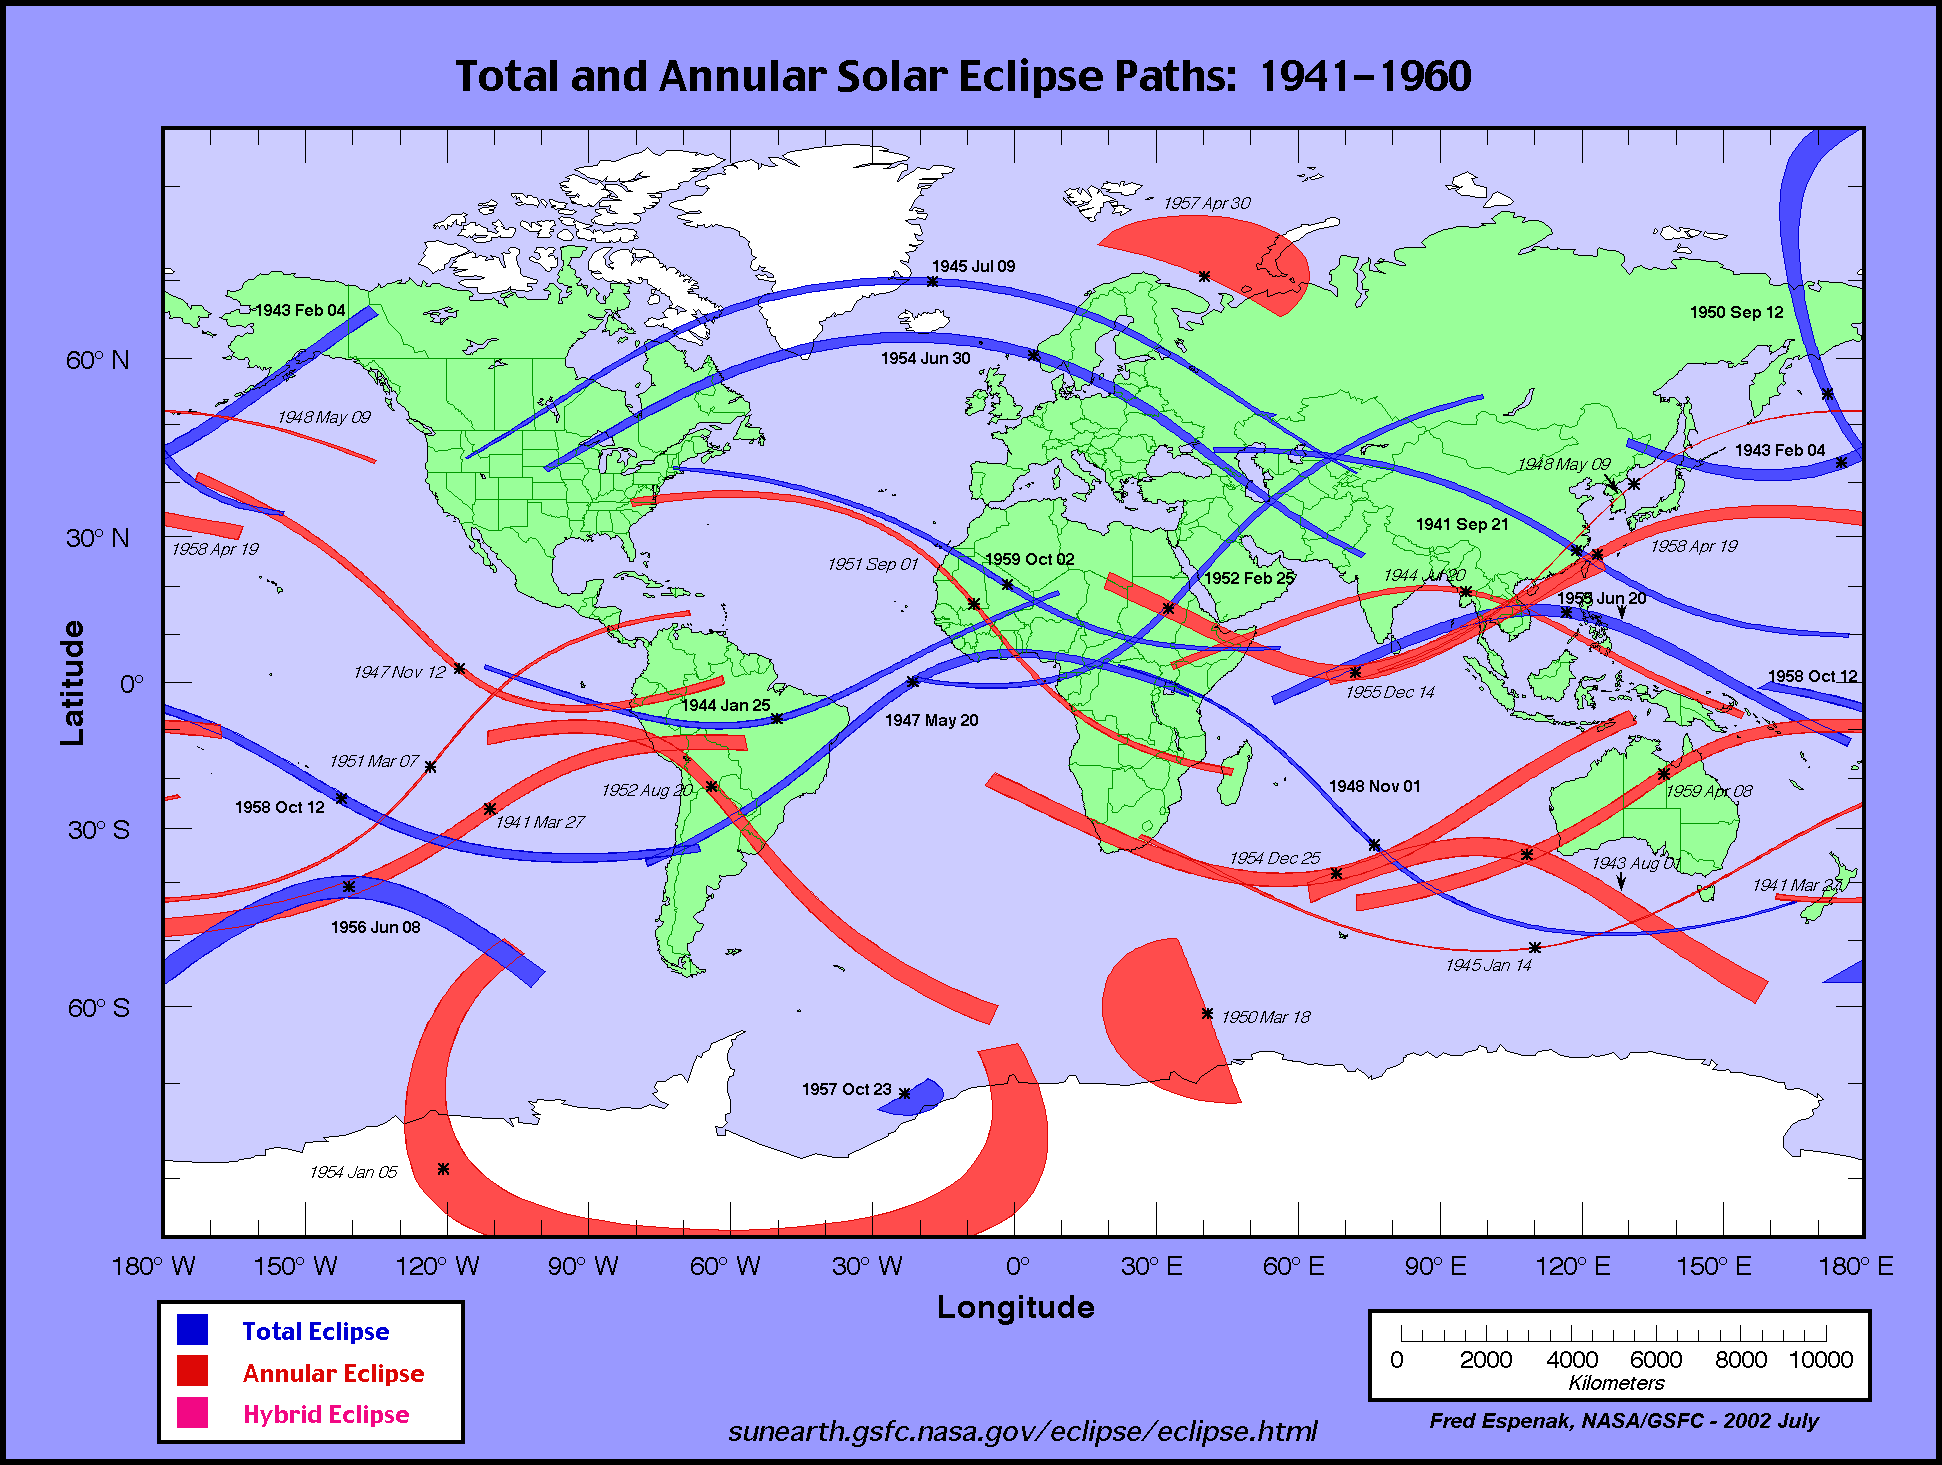 Calendar and solar eclipse maps from 1941 to 1960